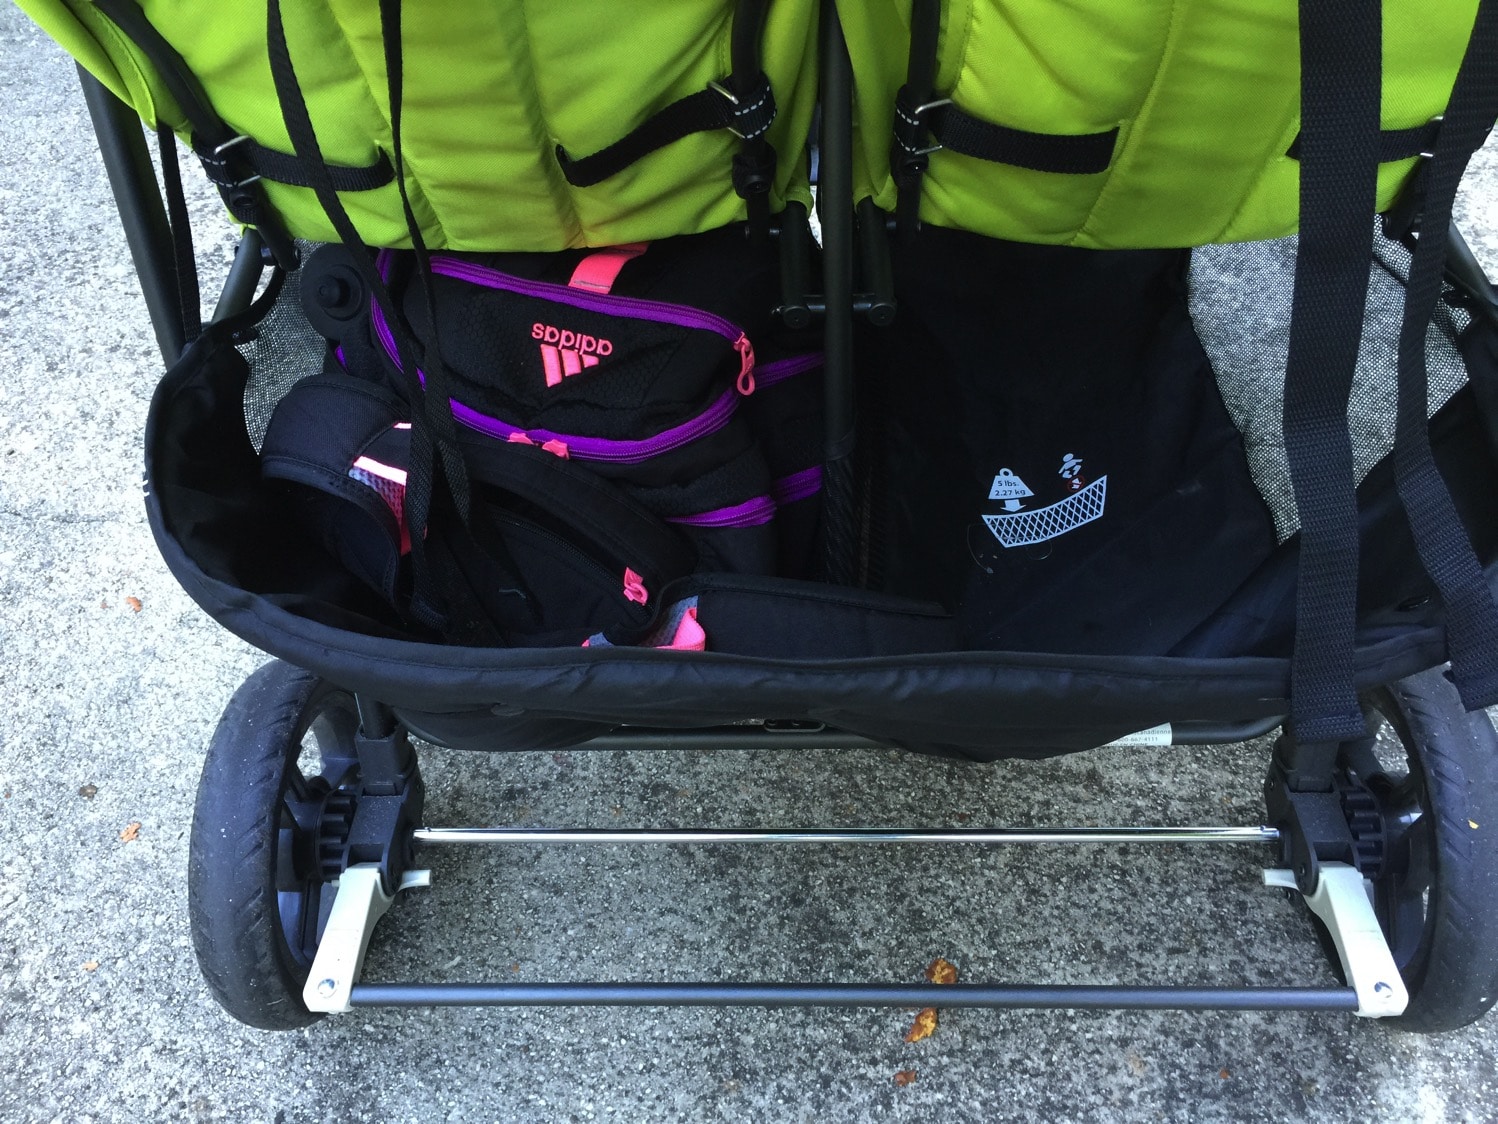 Giant backpack in basket of joovy scooter x2 with room to spare